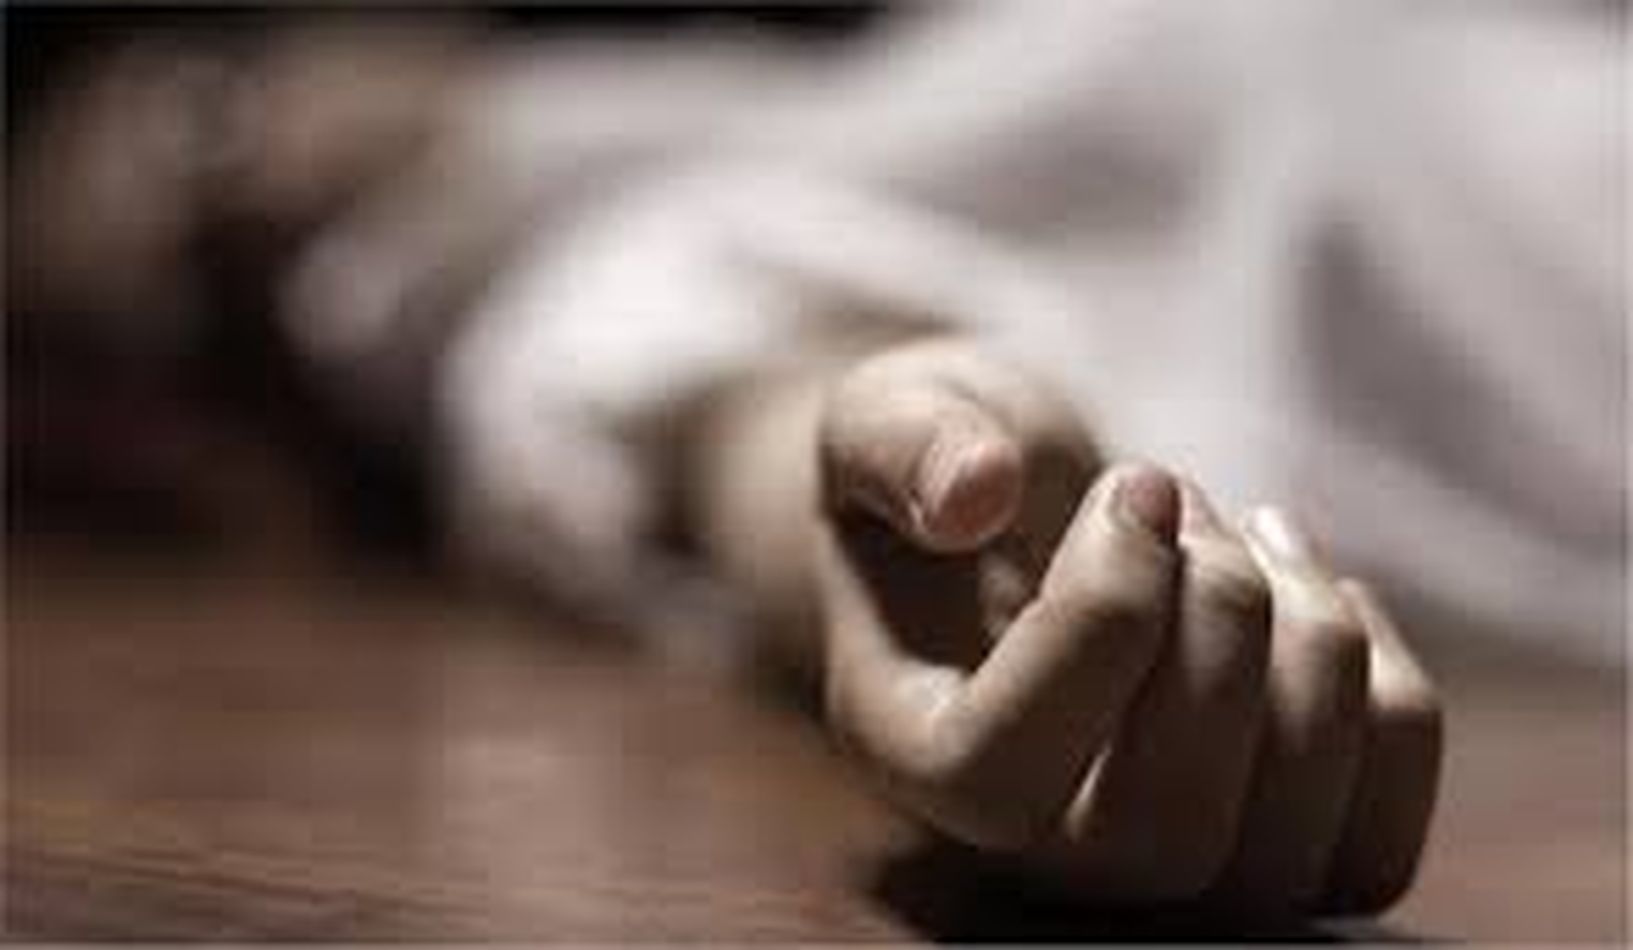 death of person drowning in diggi